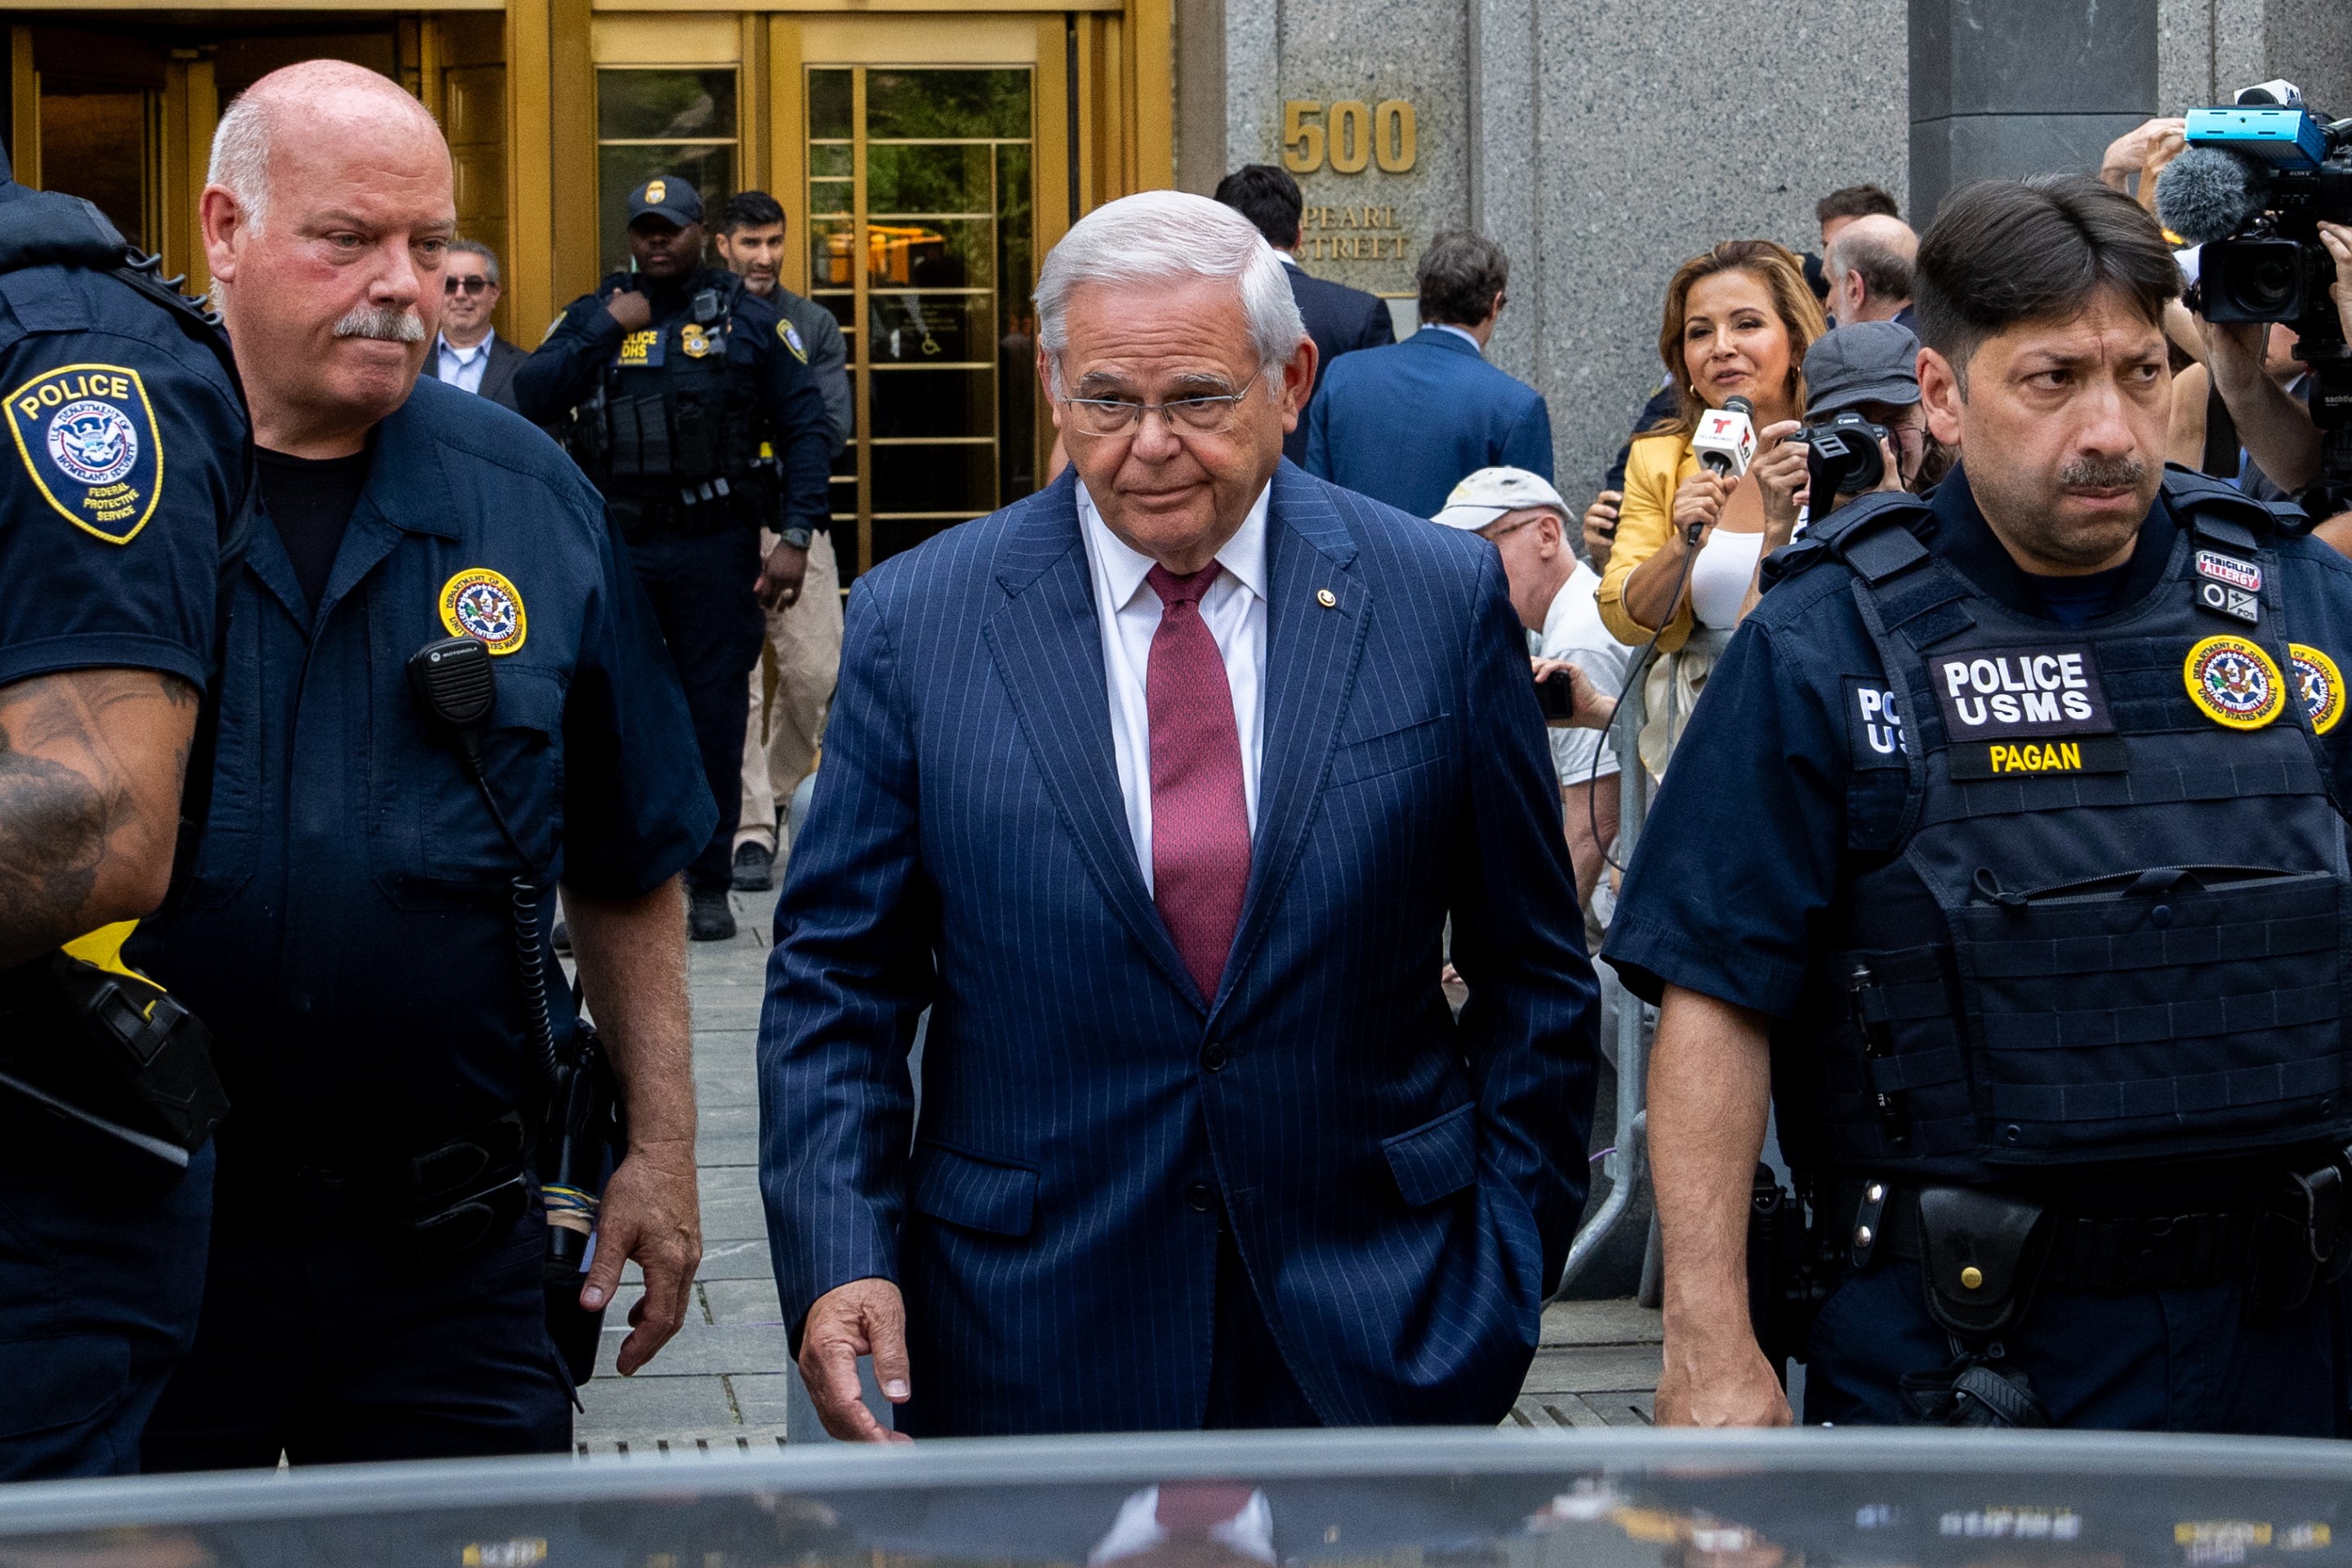 U.S. Sen. Bob Menendez (D-NJ) exits Manhattan federal court on July 16, 2024 in New York City. Menendez and his wife Nadine are accused of taking bribes of gold bars, a luxury car, and cash in exchange for using Menendez's position to help the government of Egypt.